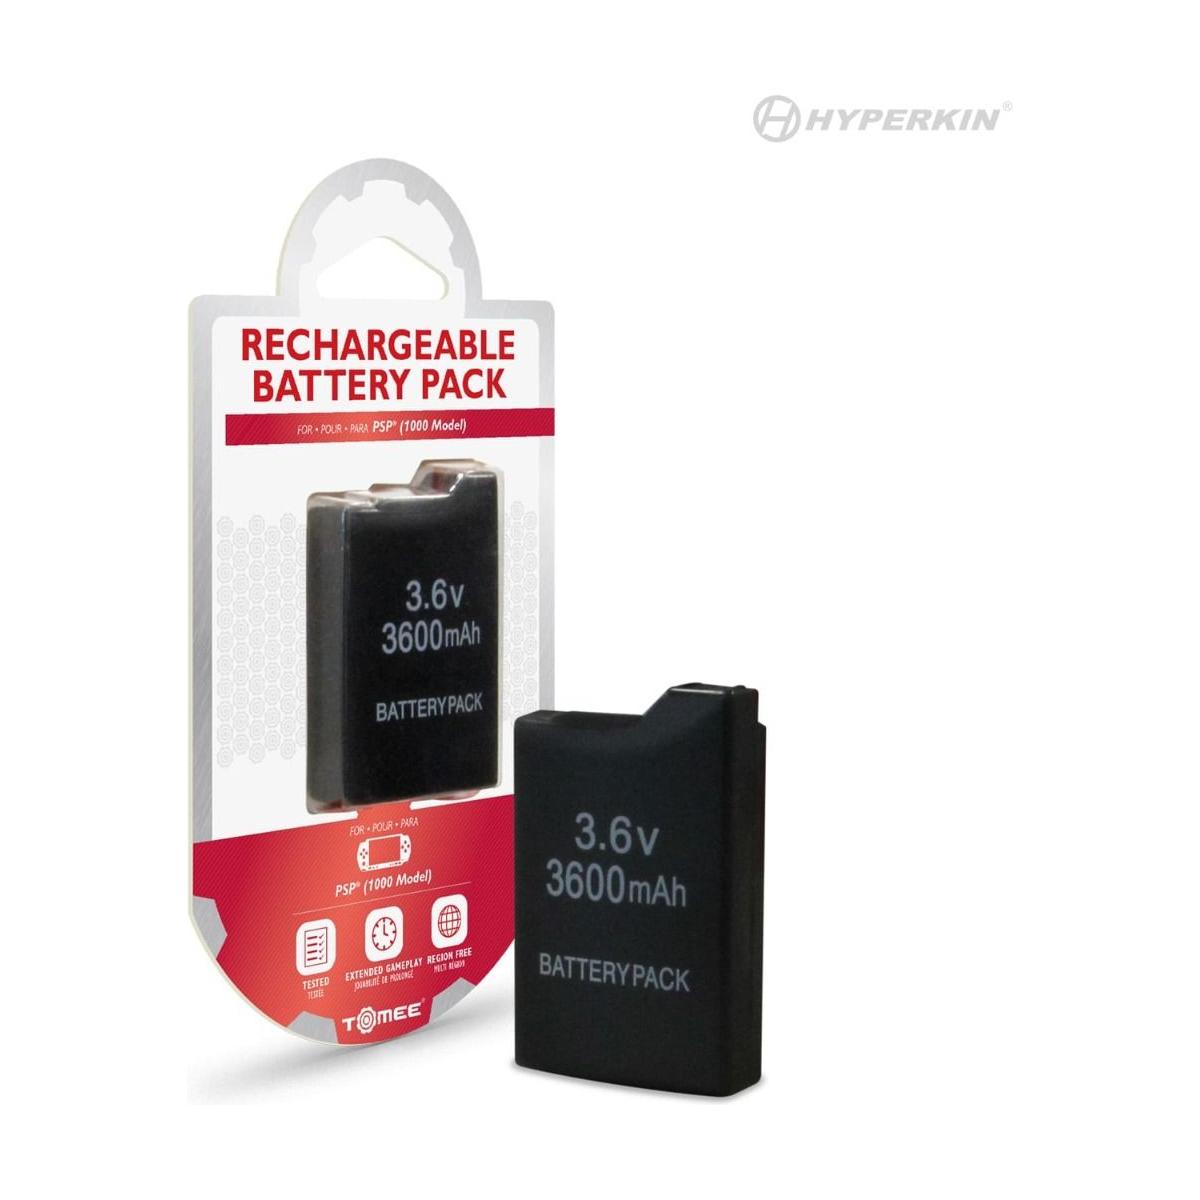 PSP 1000 Rechargeable Battery Pack